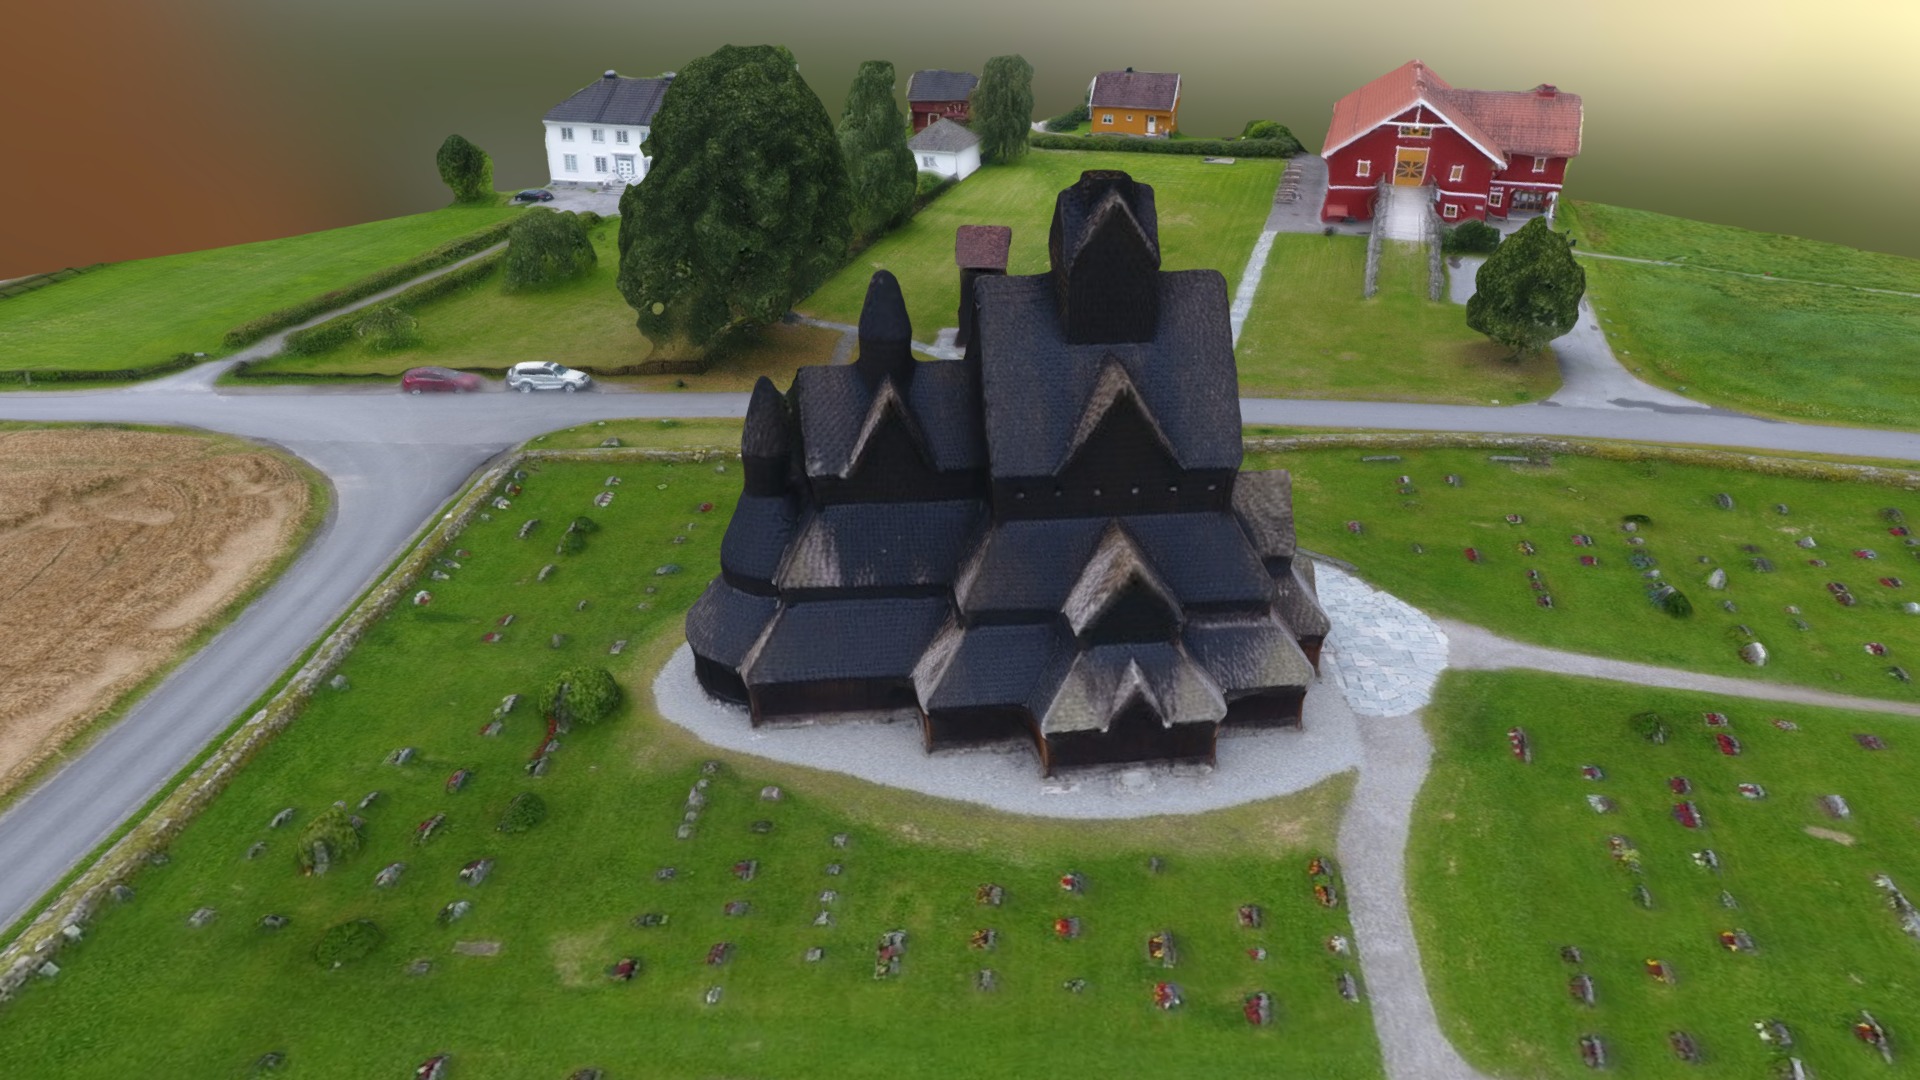 3D model Heddal Stave Church - This is a 3D model of the Heddal Stave Church. The 3D model is about a building with a red roof.